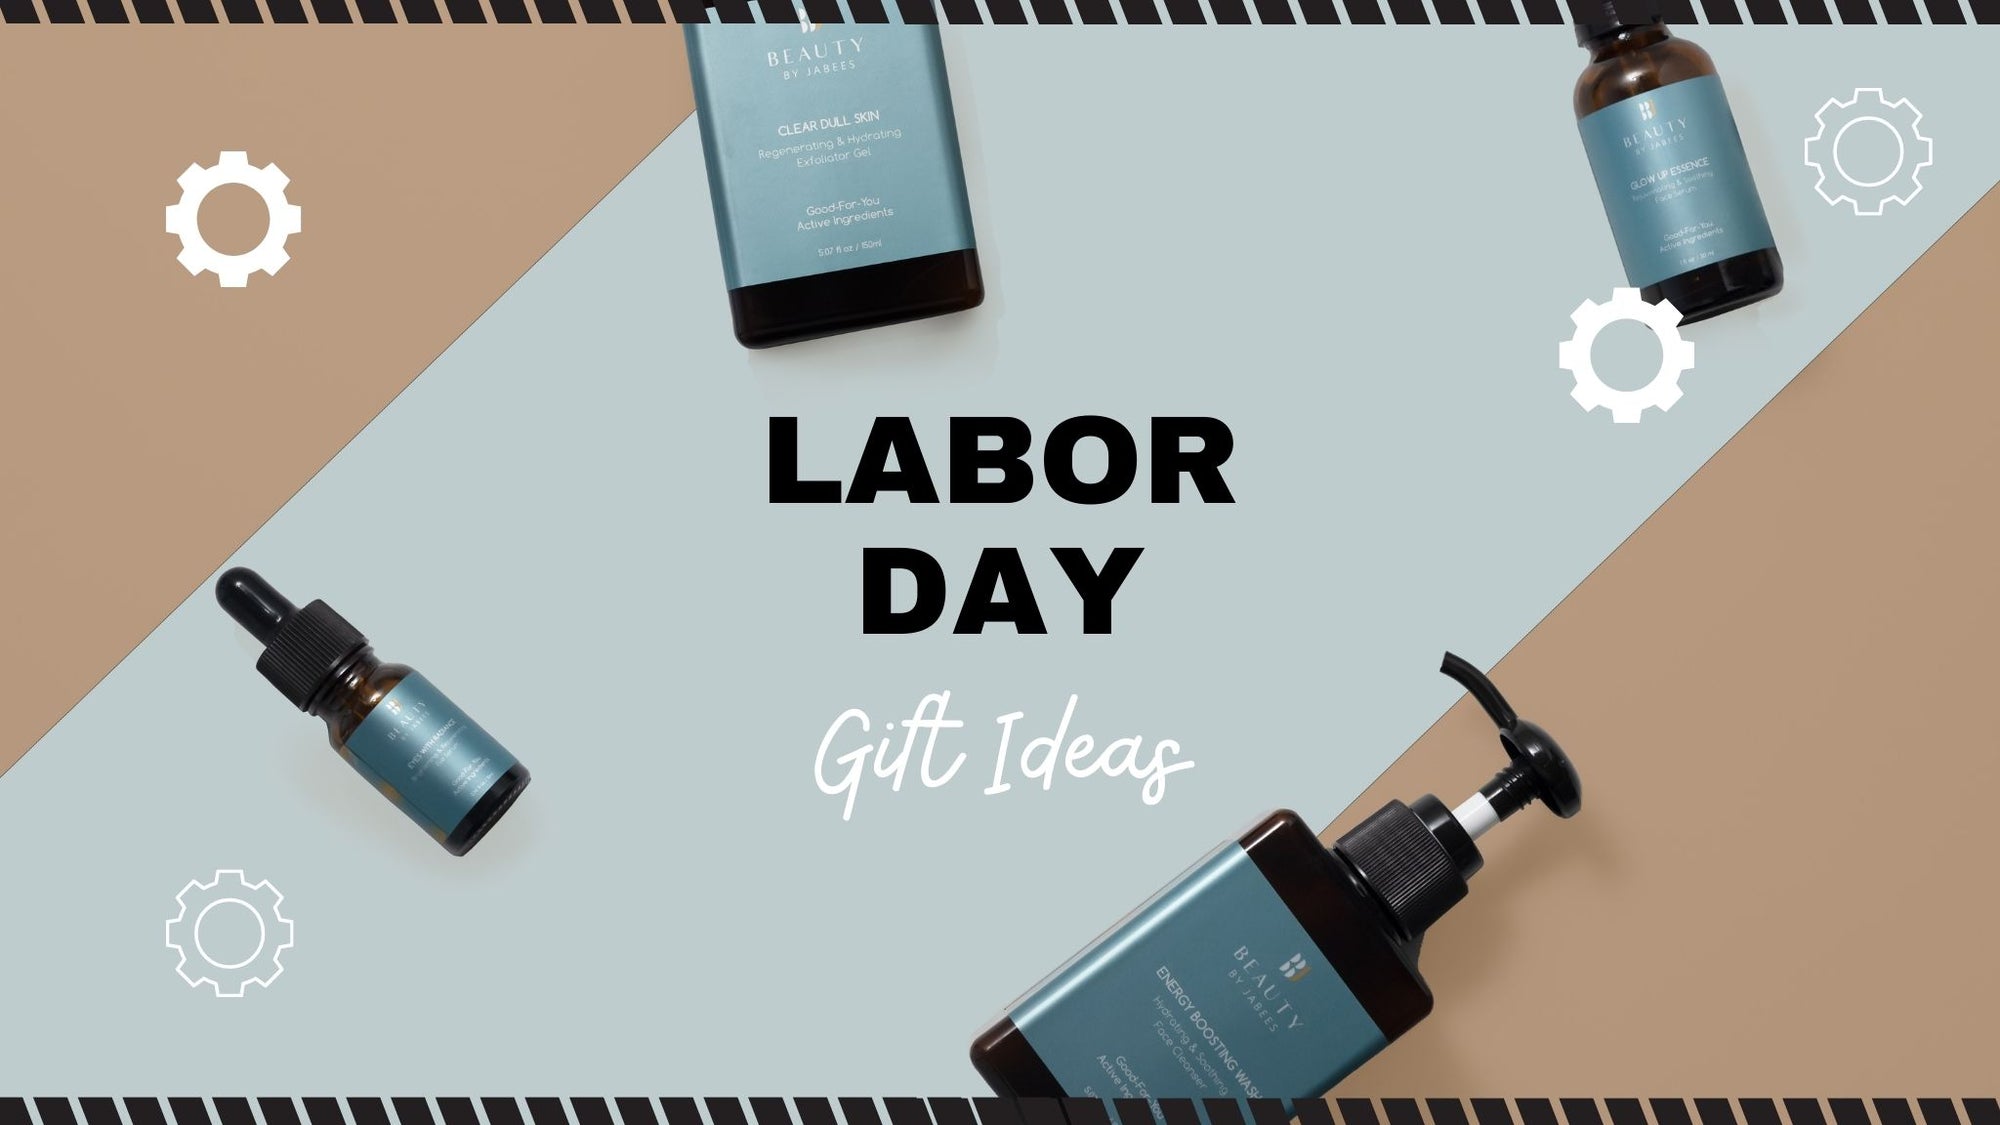 Labor Day Day Gift Ideas for your Employees